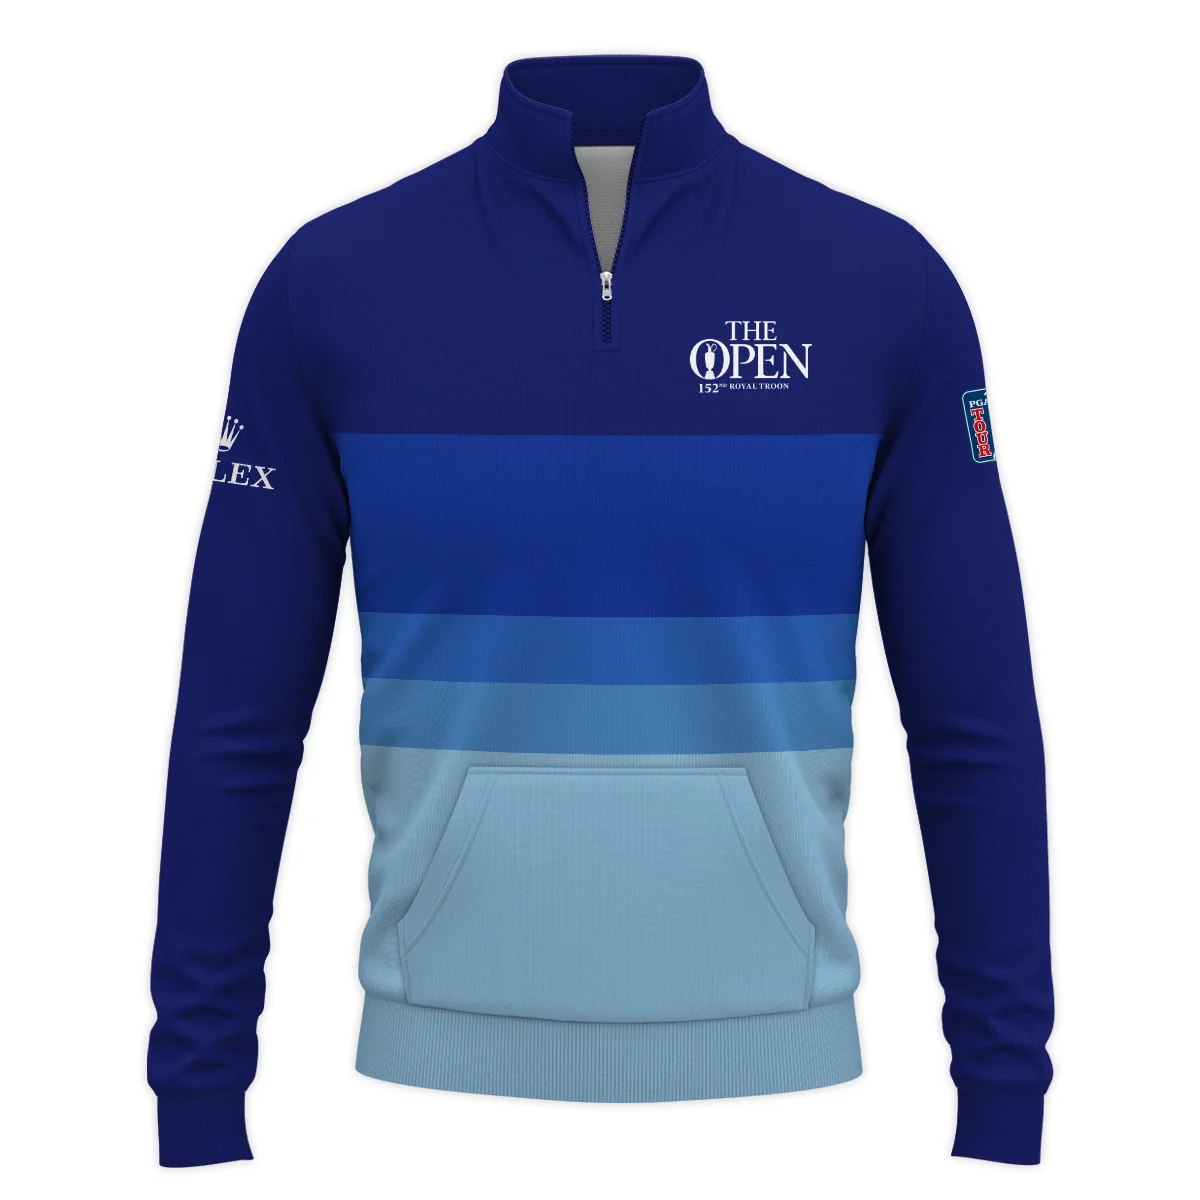 Blue Gradient Line Pattern Background Rolex 152nd Open Championship Performance Quarter Zip Sweatshirt With Pockets All Over Prints HOTOP270624A04ROXTS